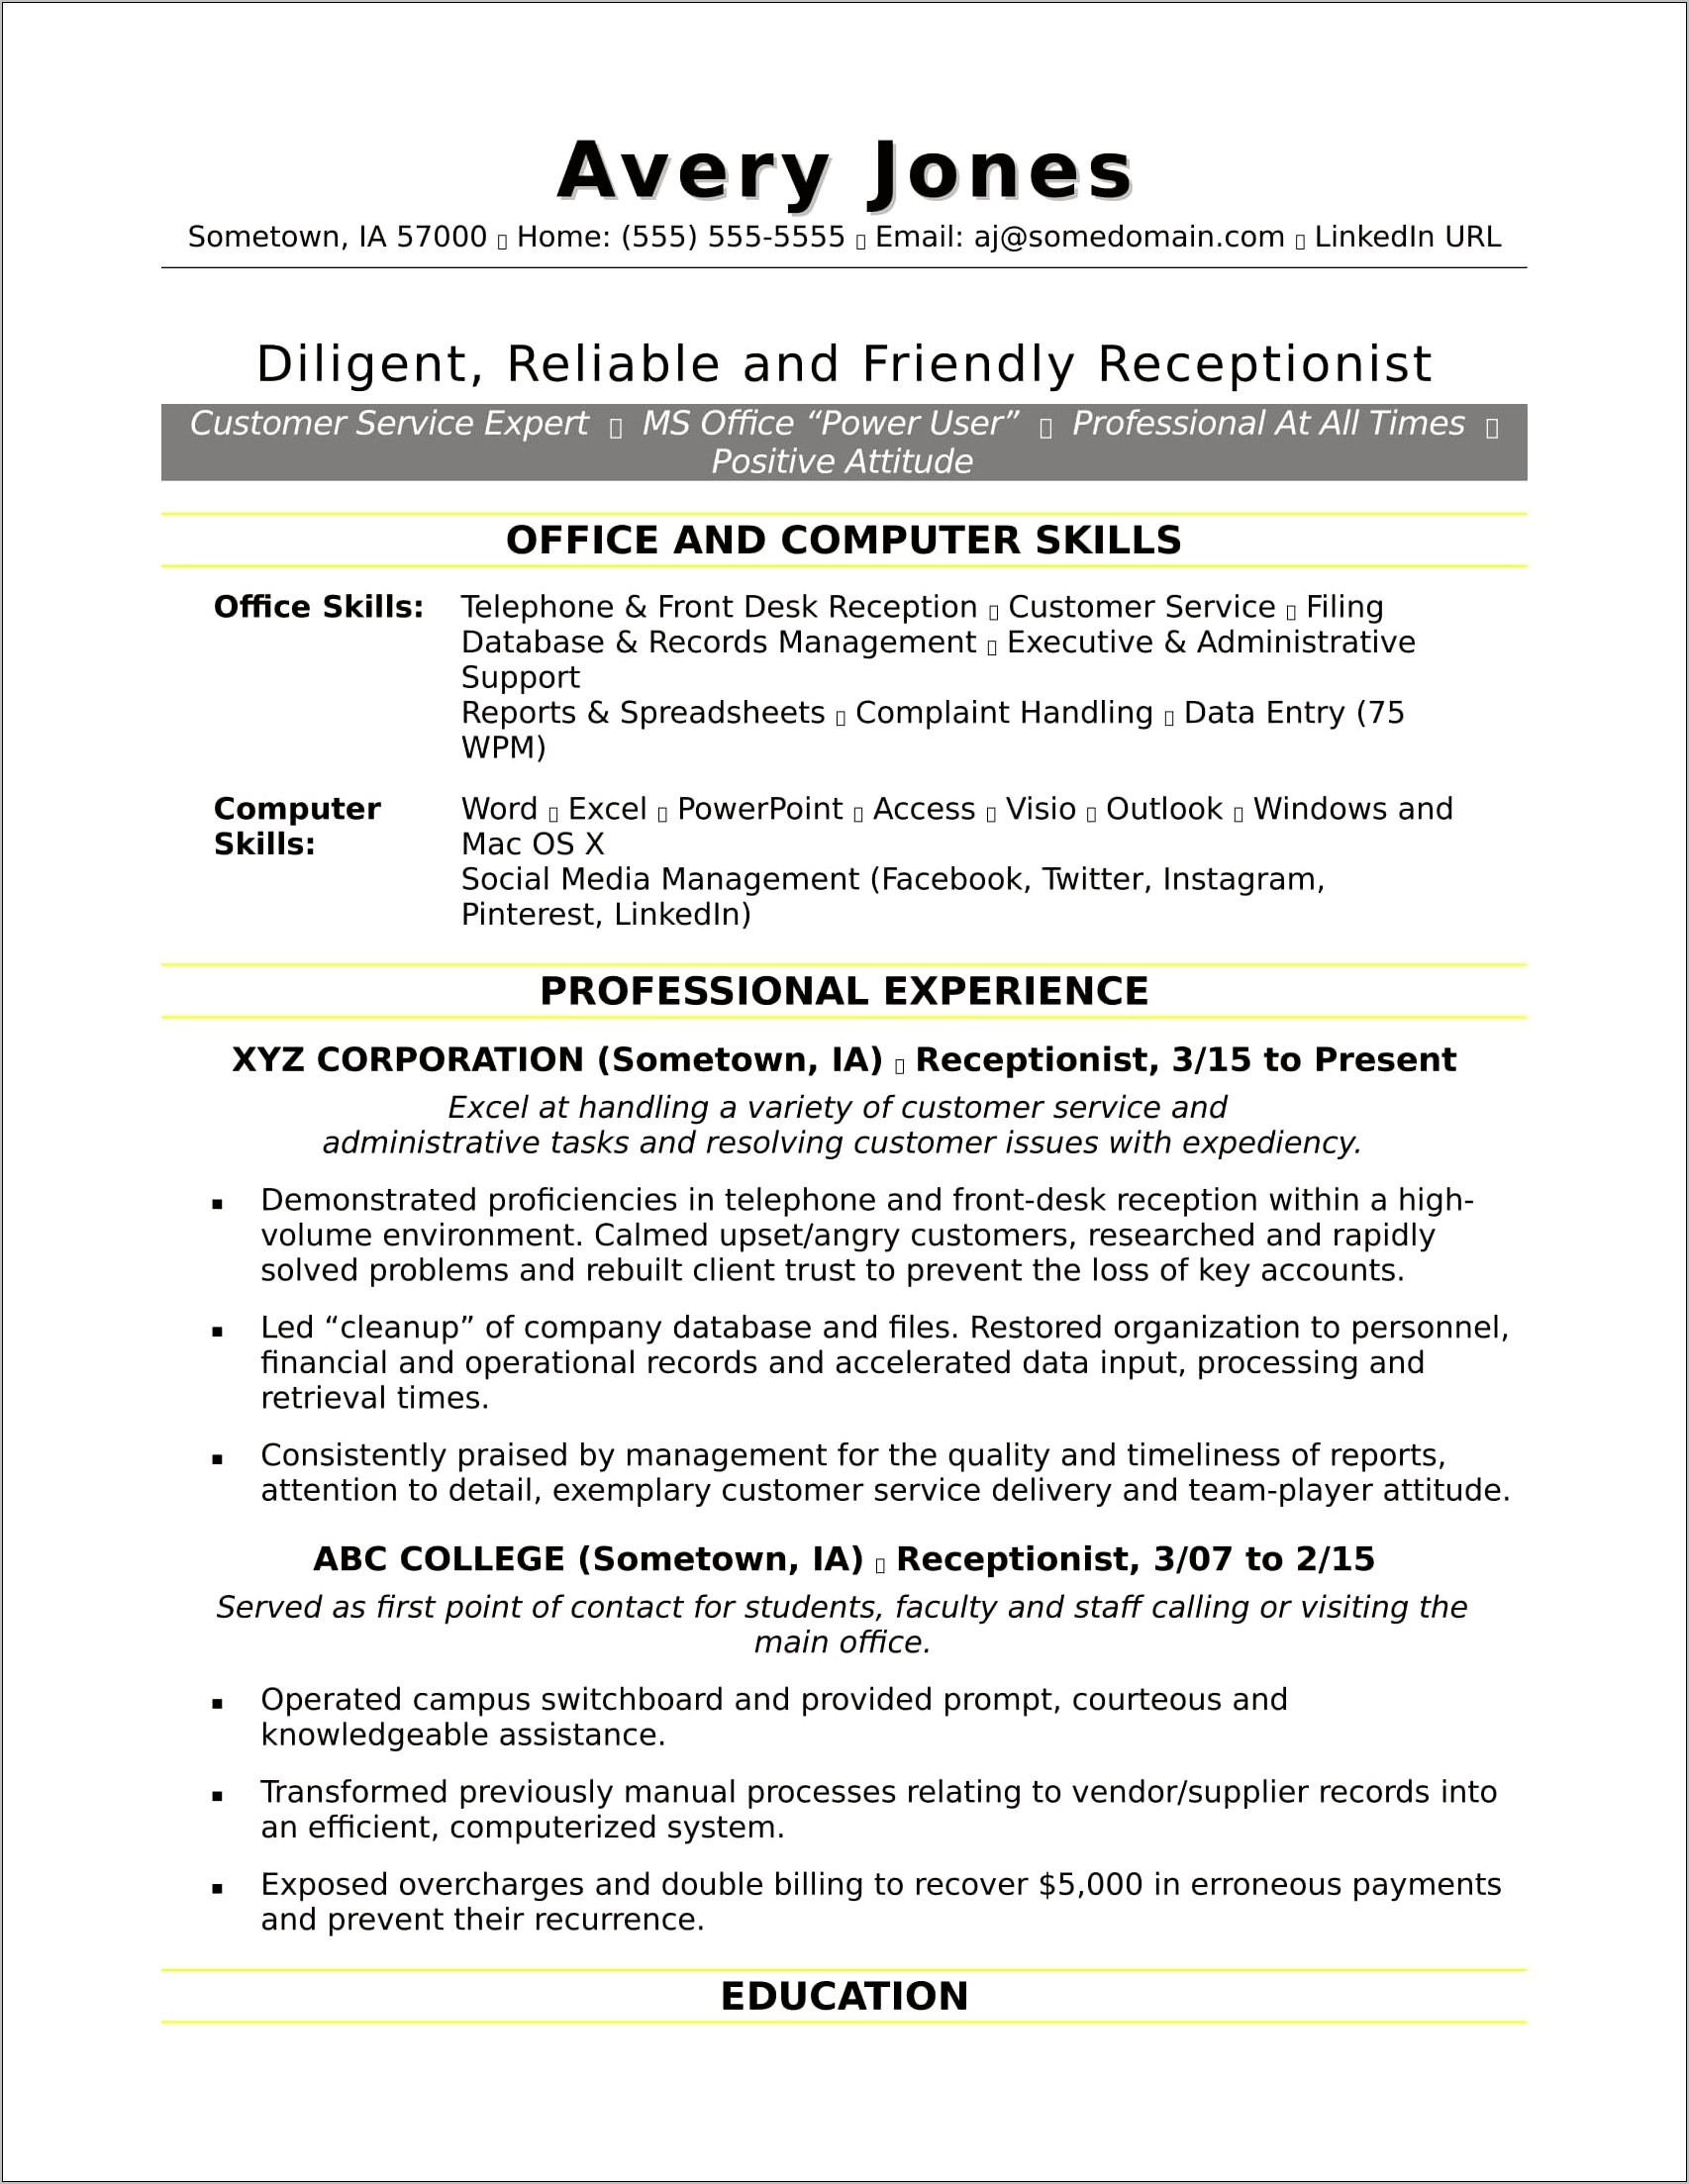 Essential Office Skills For Resume Examples